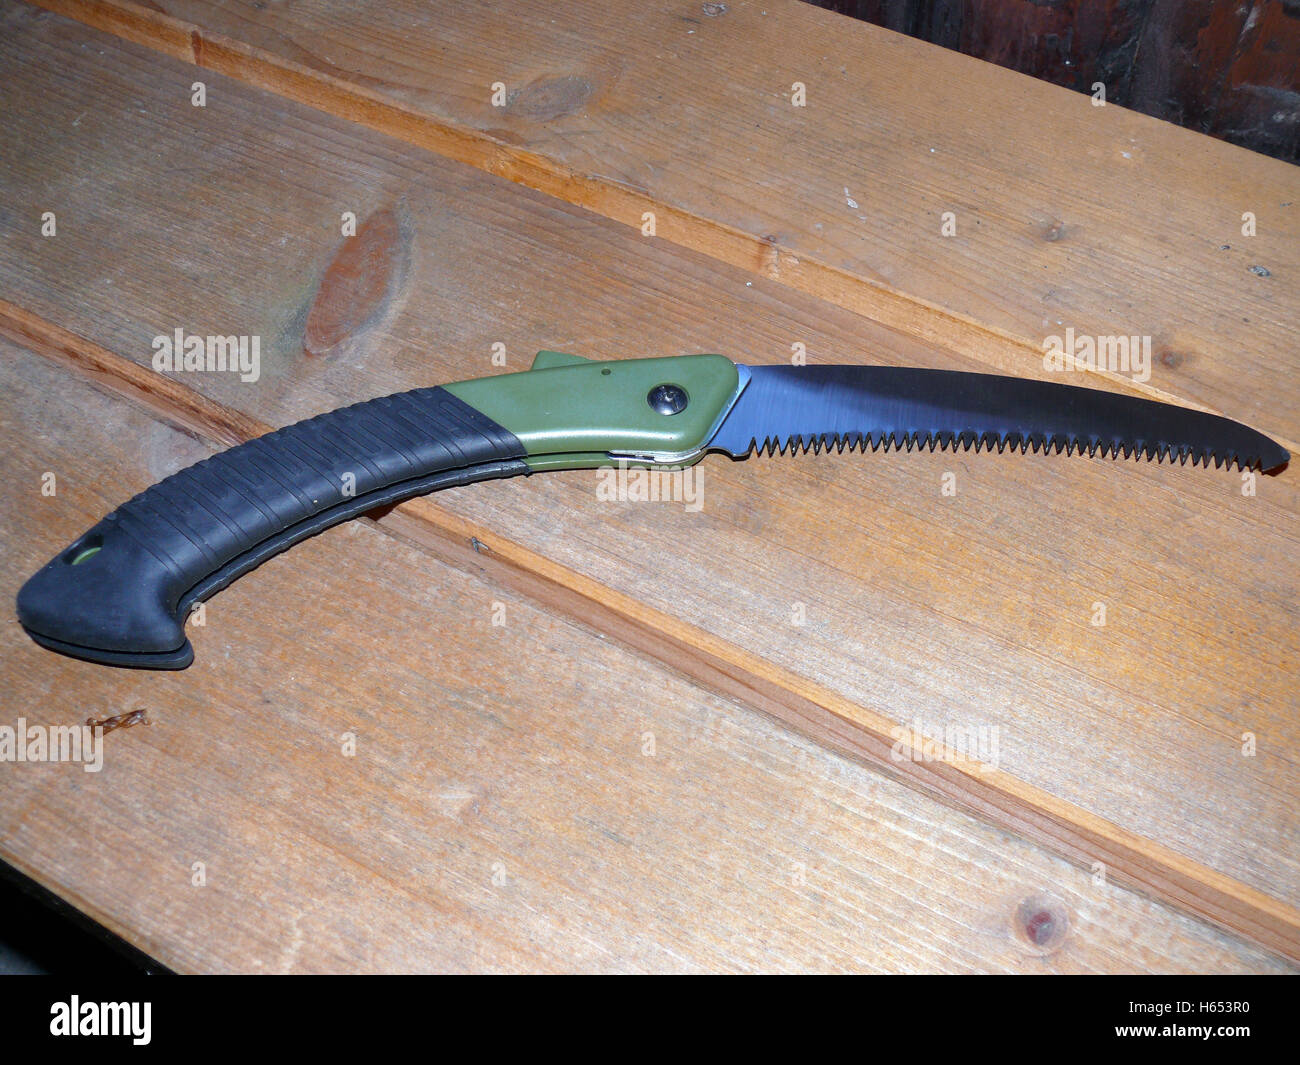 a pruning saw with green handle on wooden background Stock Photo